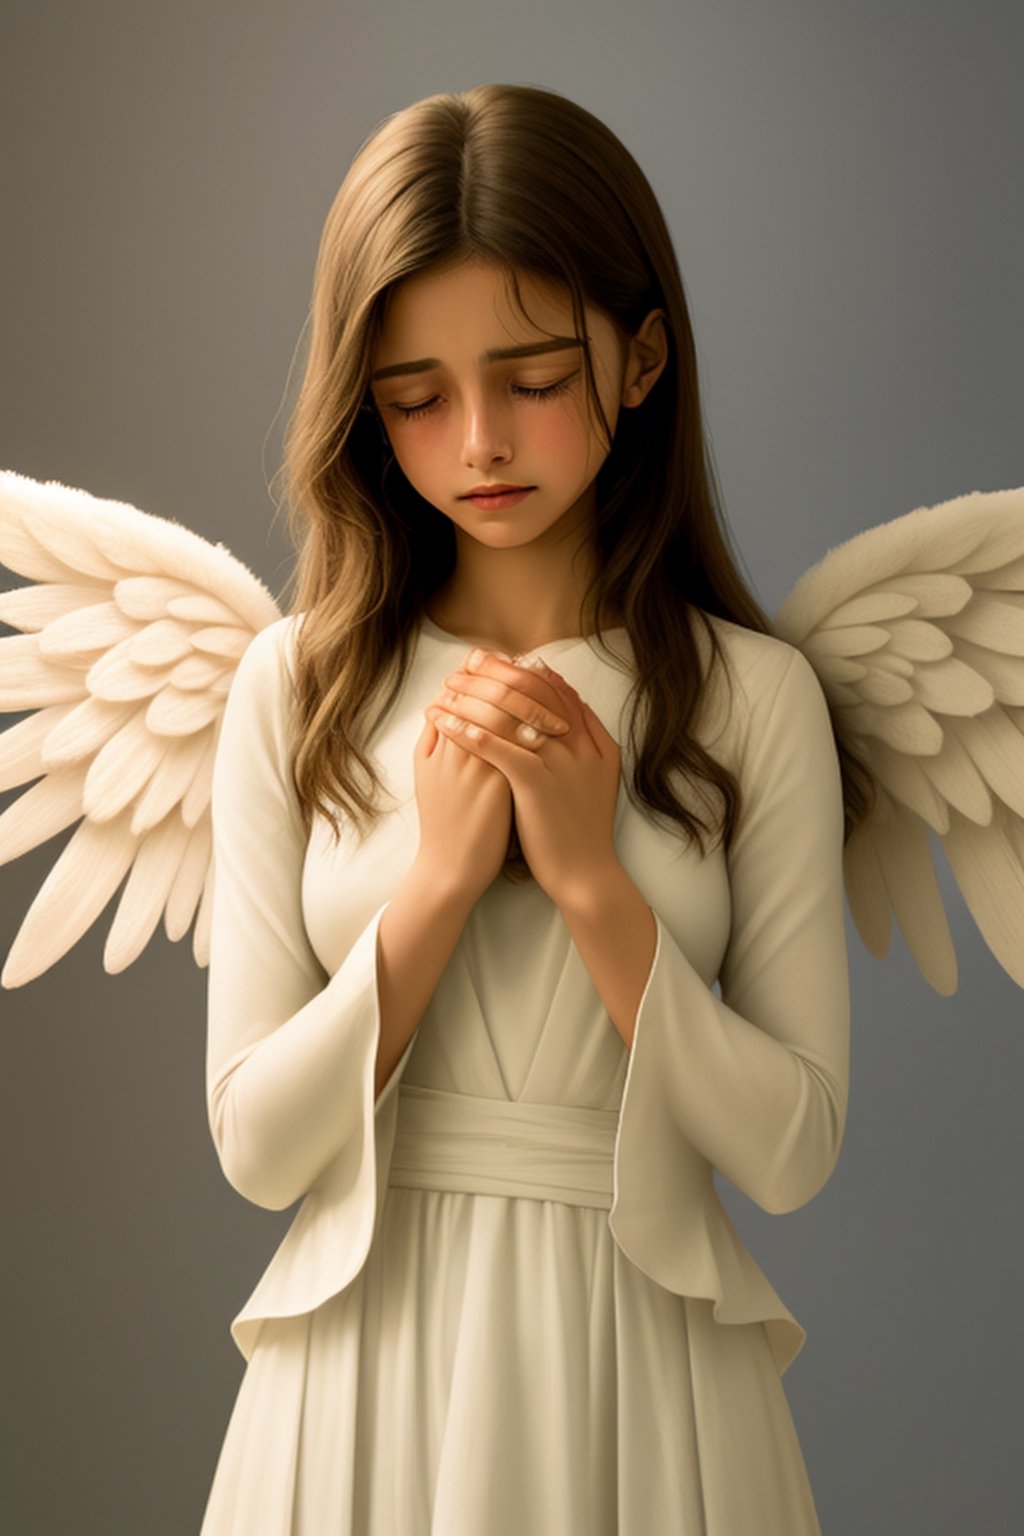 angel crying into her hands. stood side on.